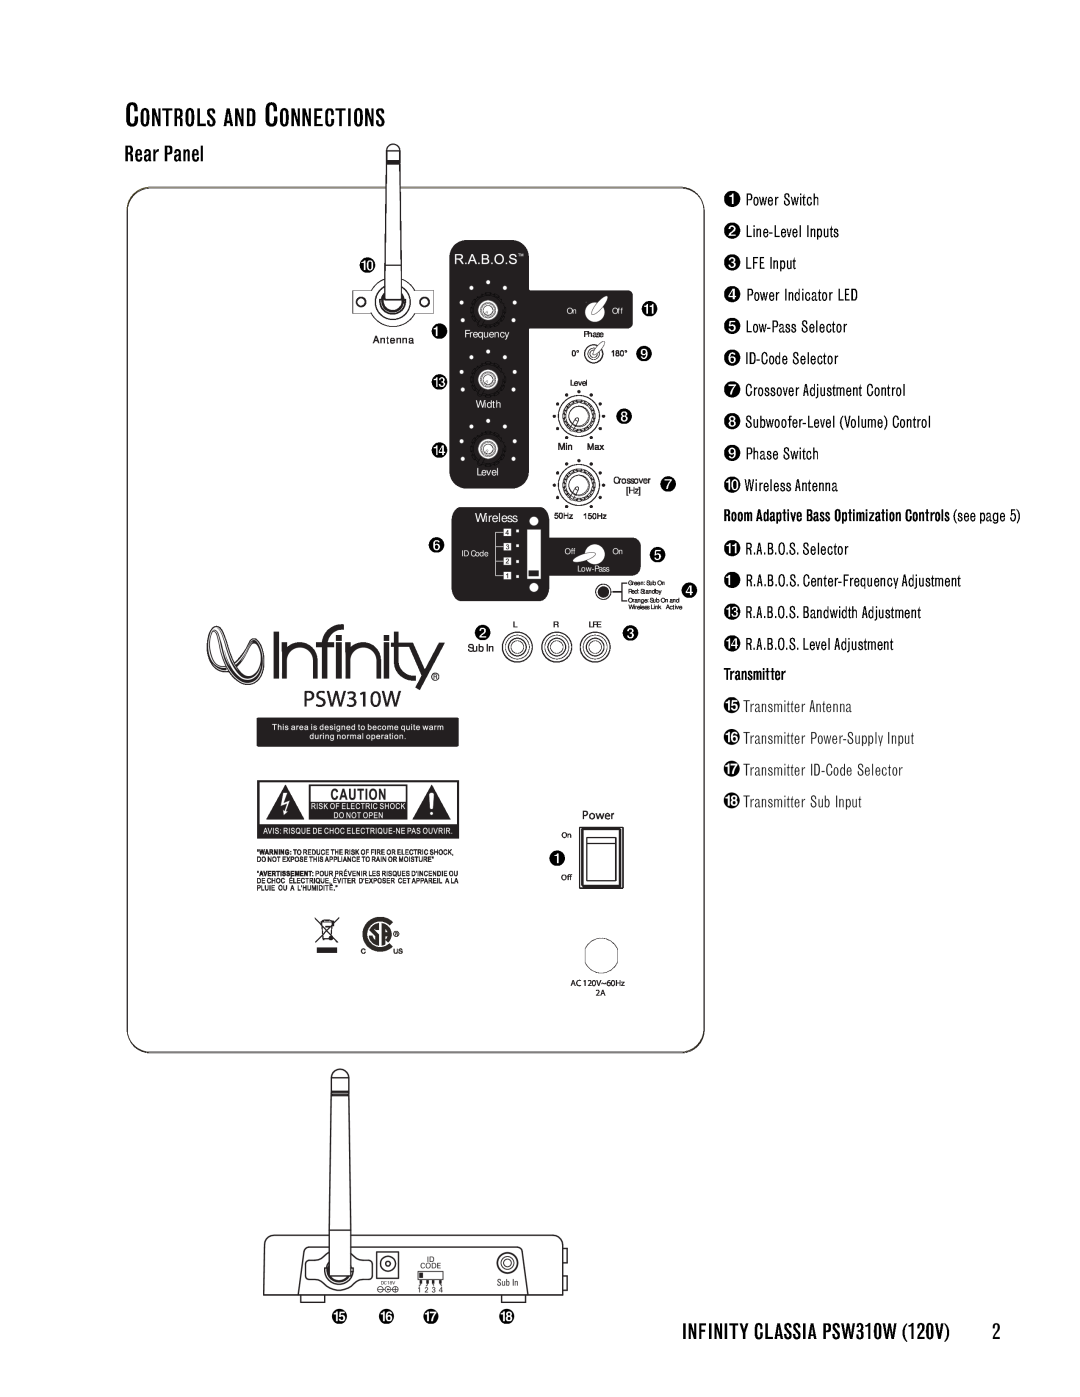 Infinity PSW310W manual Controls And Connections, Rear Panel 